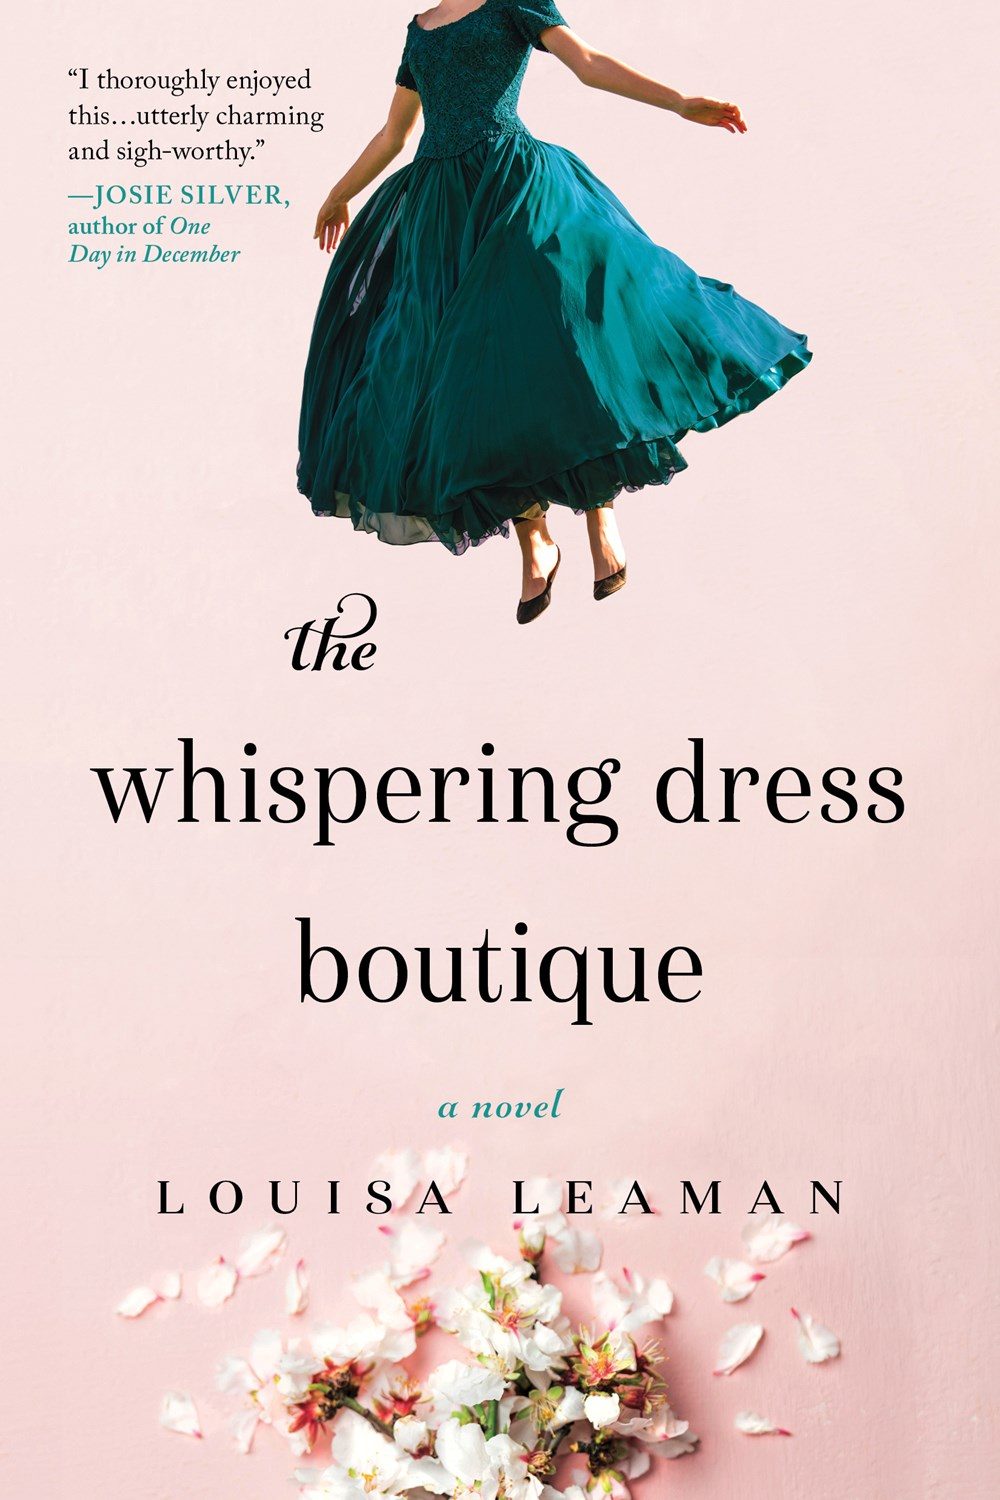 The Whispering Dress Boutique By Louisa Leaman Releases Date? 2020 Contemporary Women's Fiction Releases